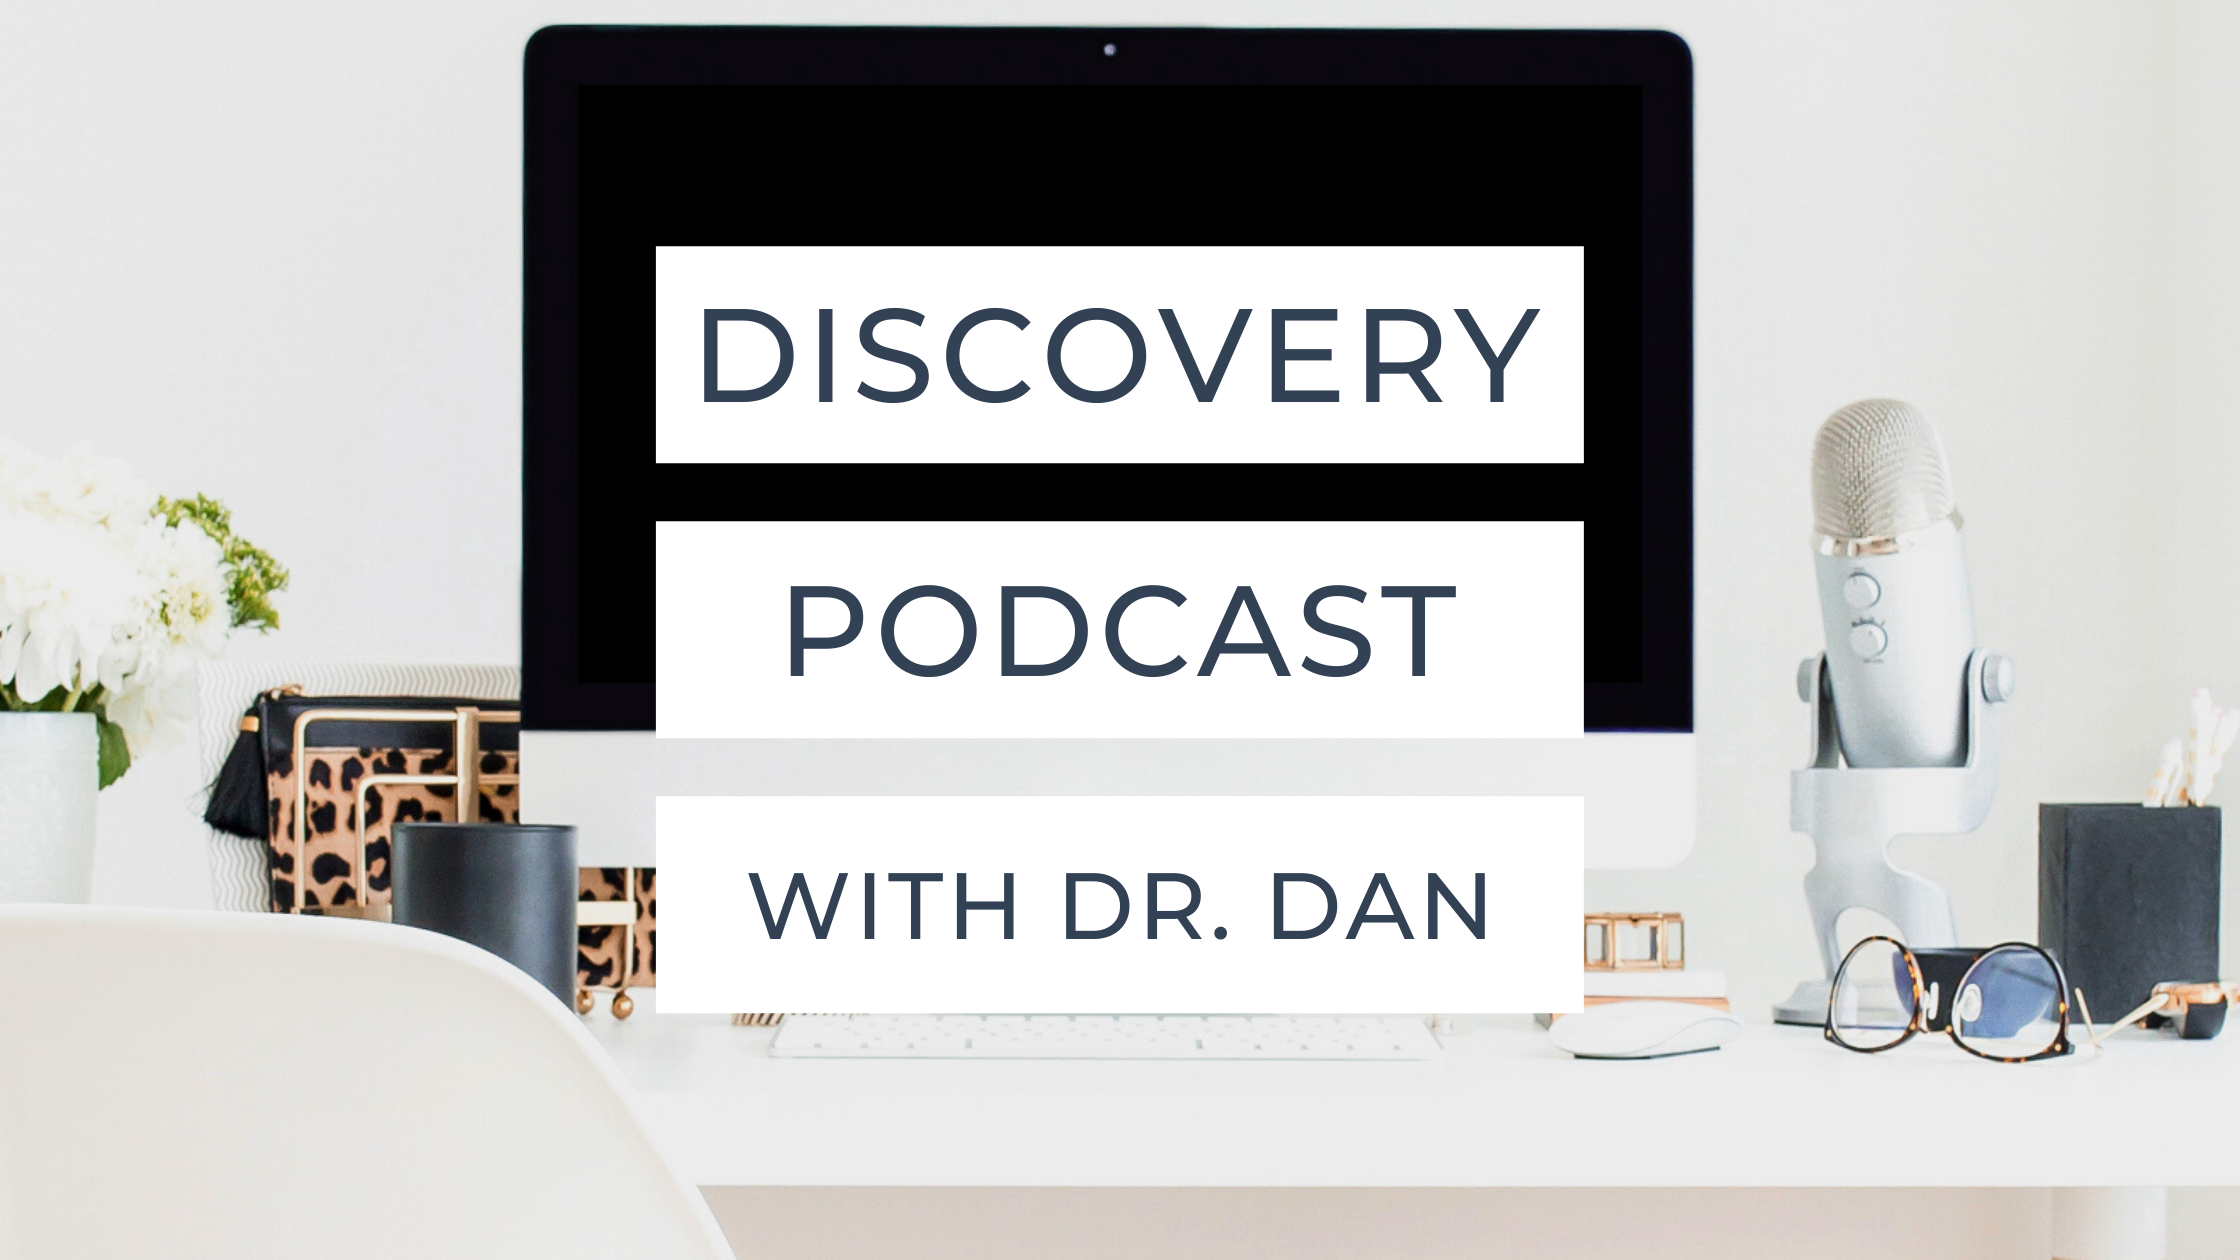 Discovery Podcast